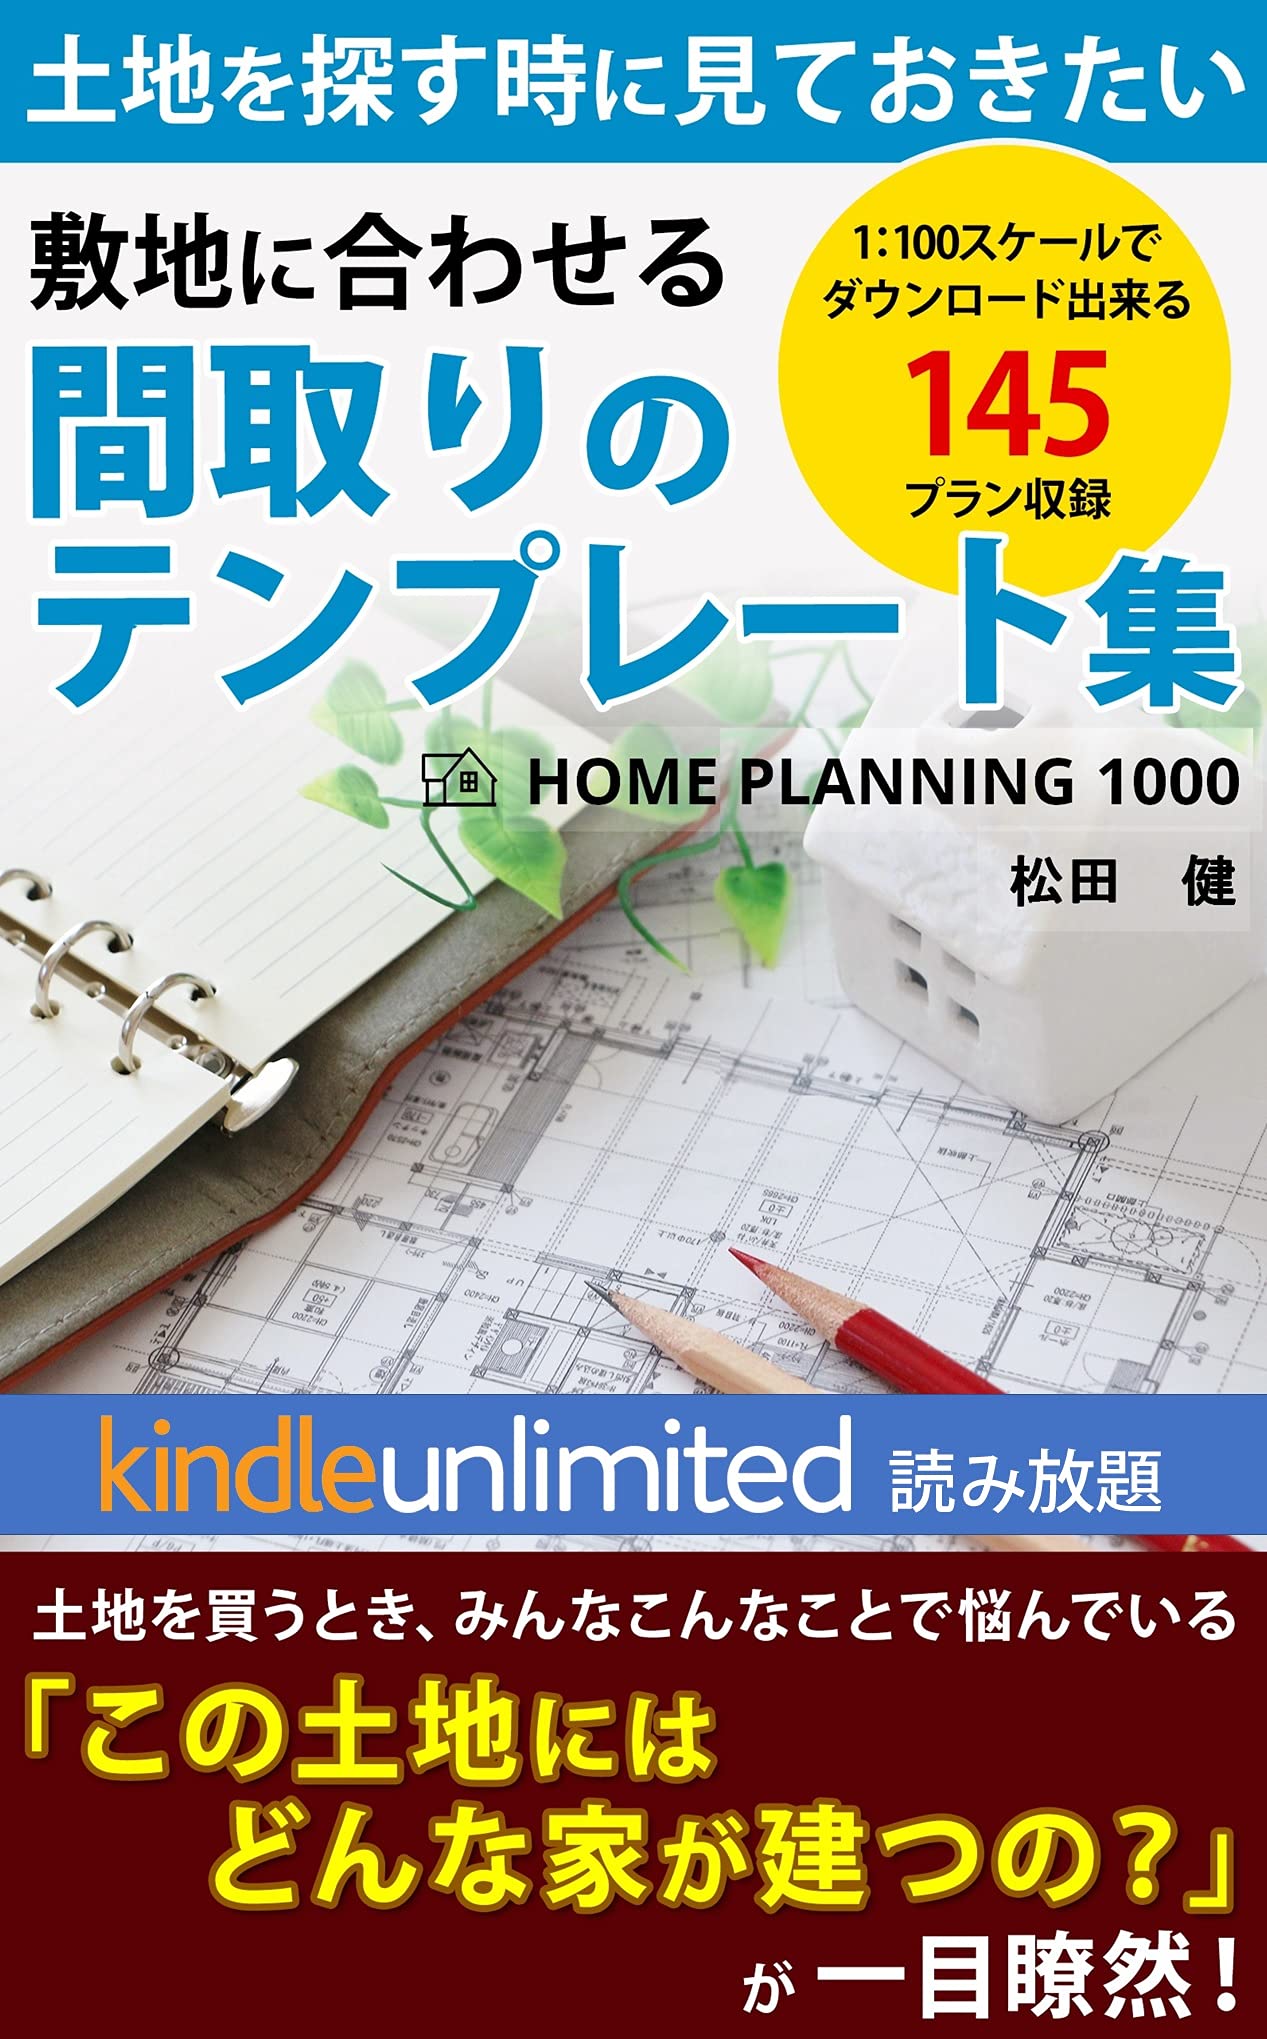 145 typical japanese floor plans for kindle Unlimited (Japanese Edition)